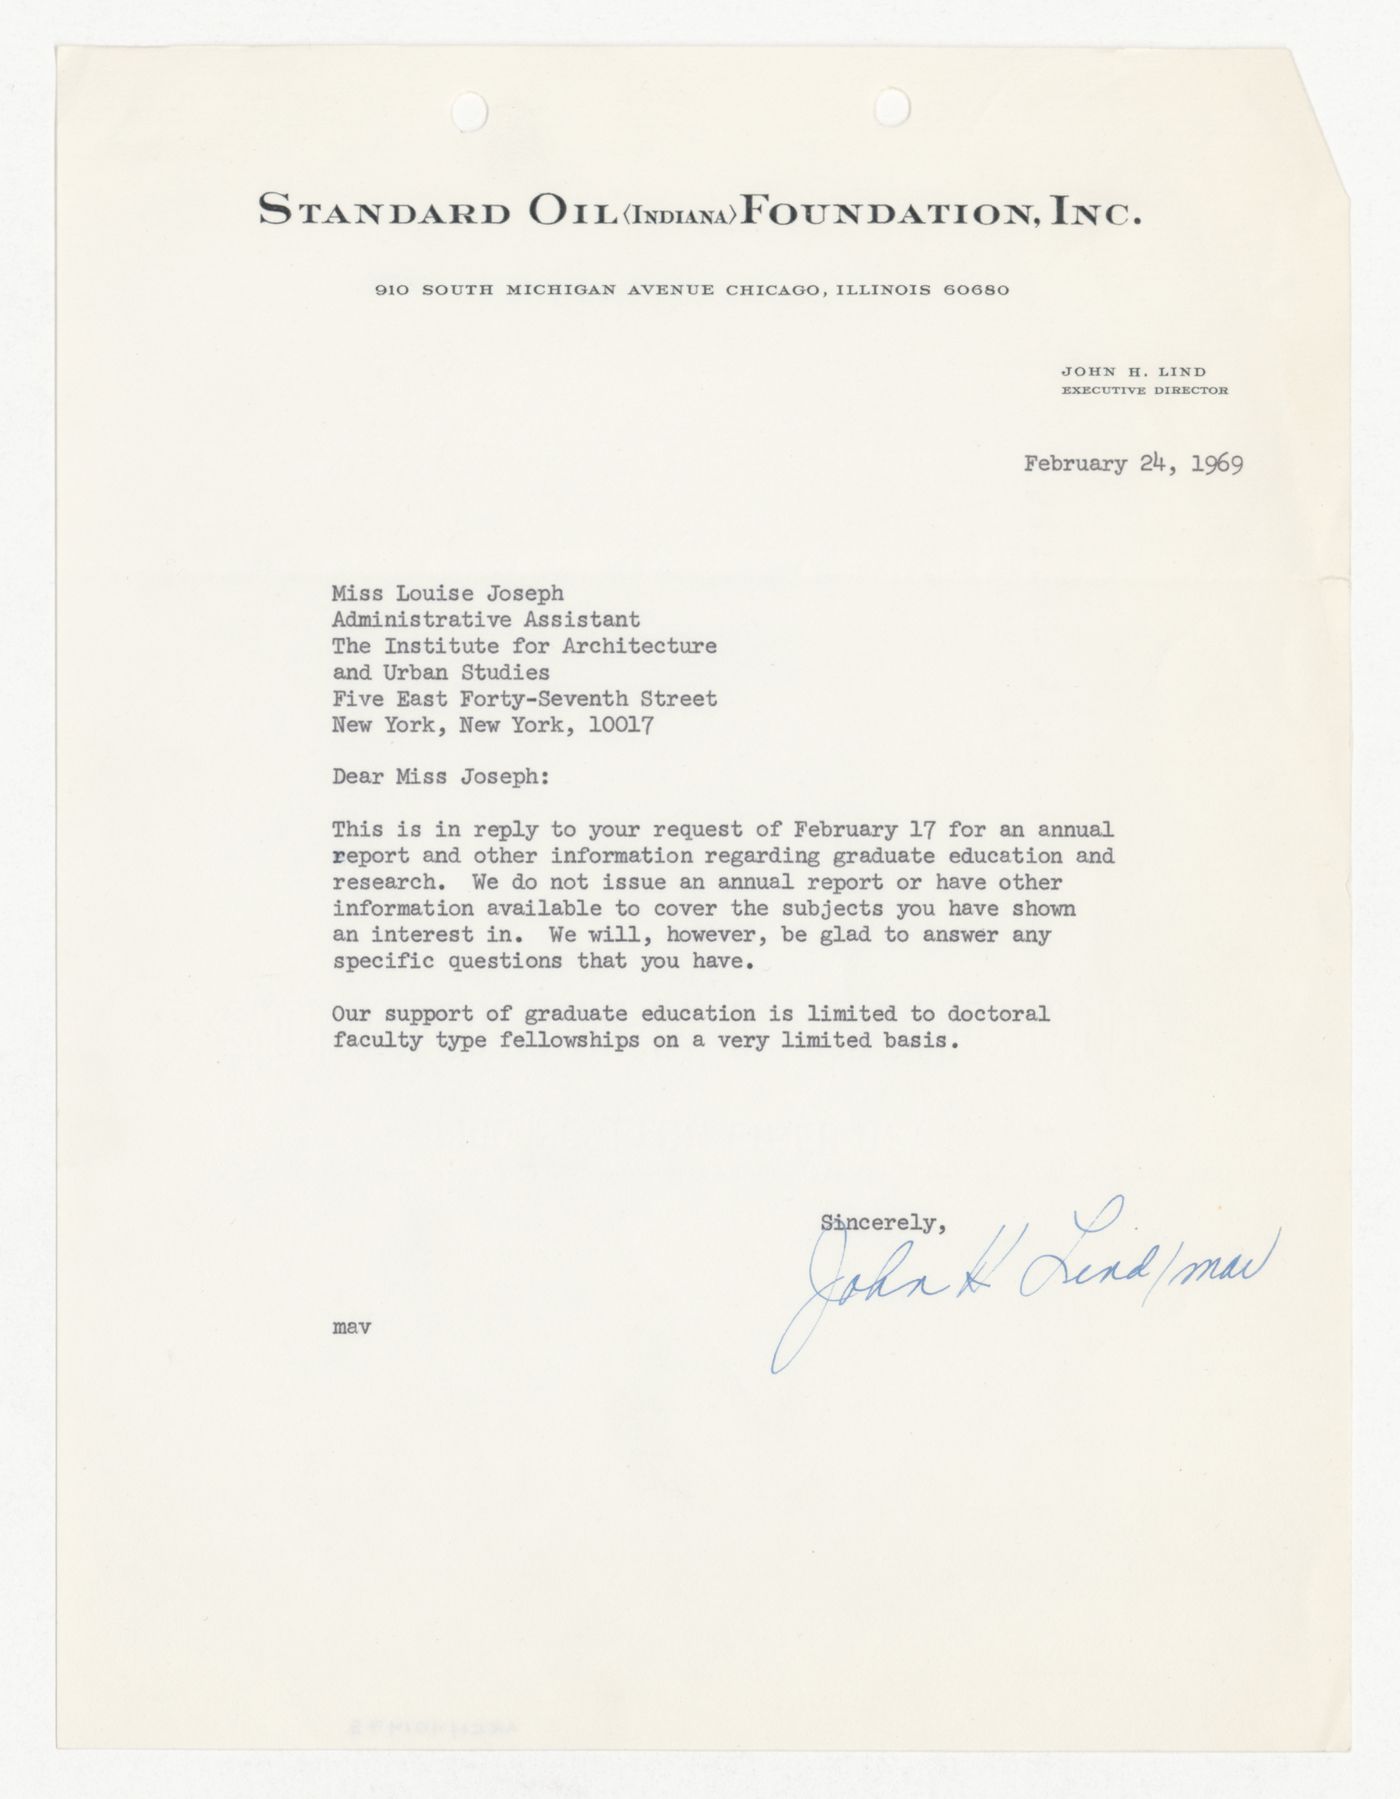 Letter from John H. Lind to Louise Joseph responding to Joseph's request for information about the Standard Oil Foundation